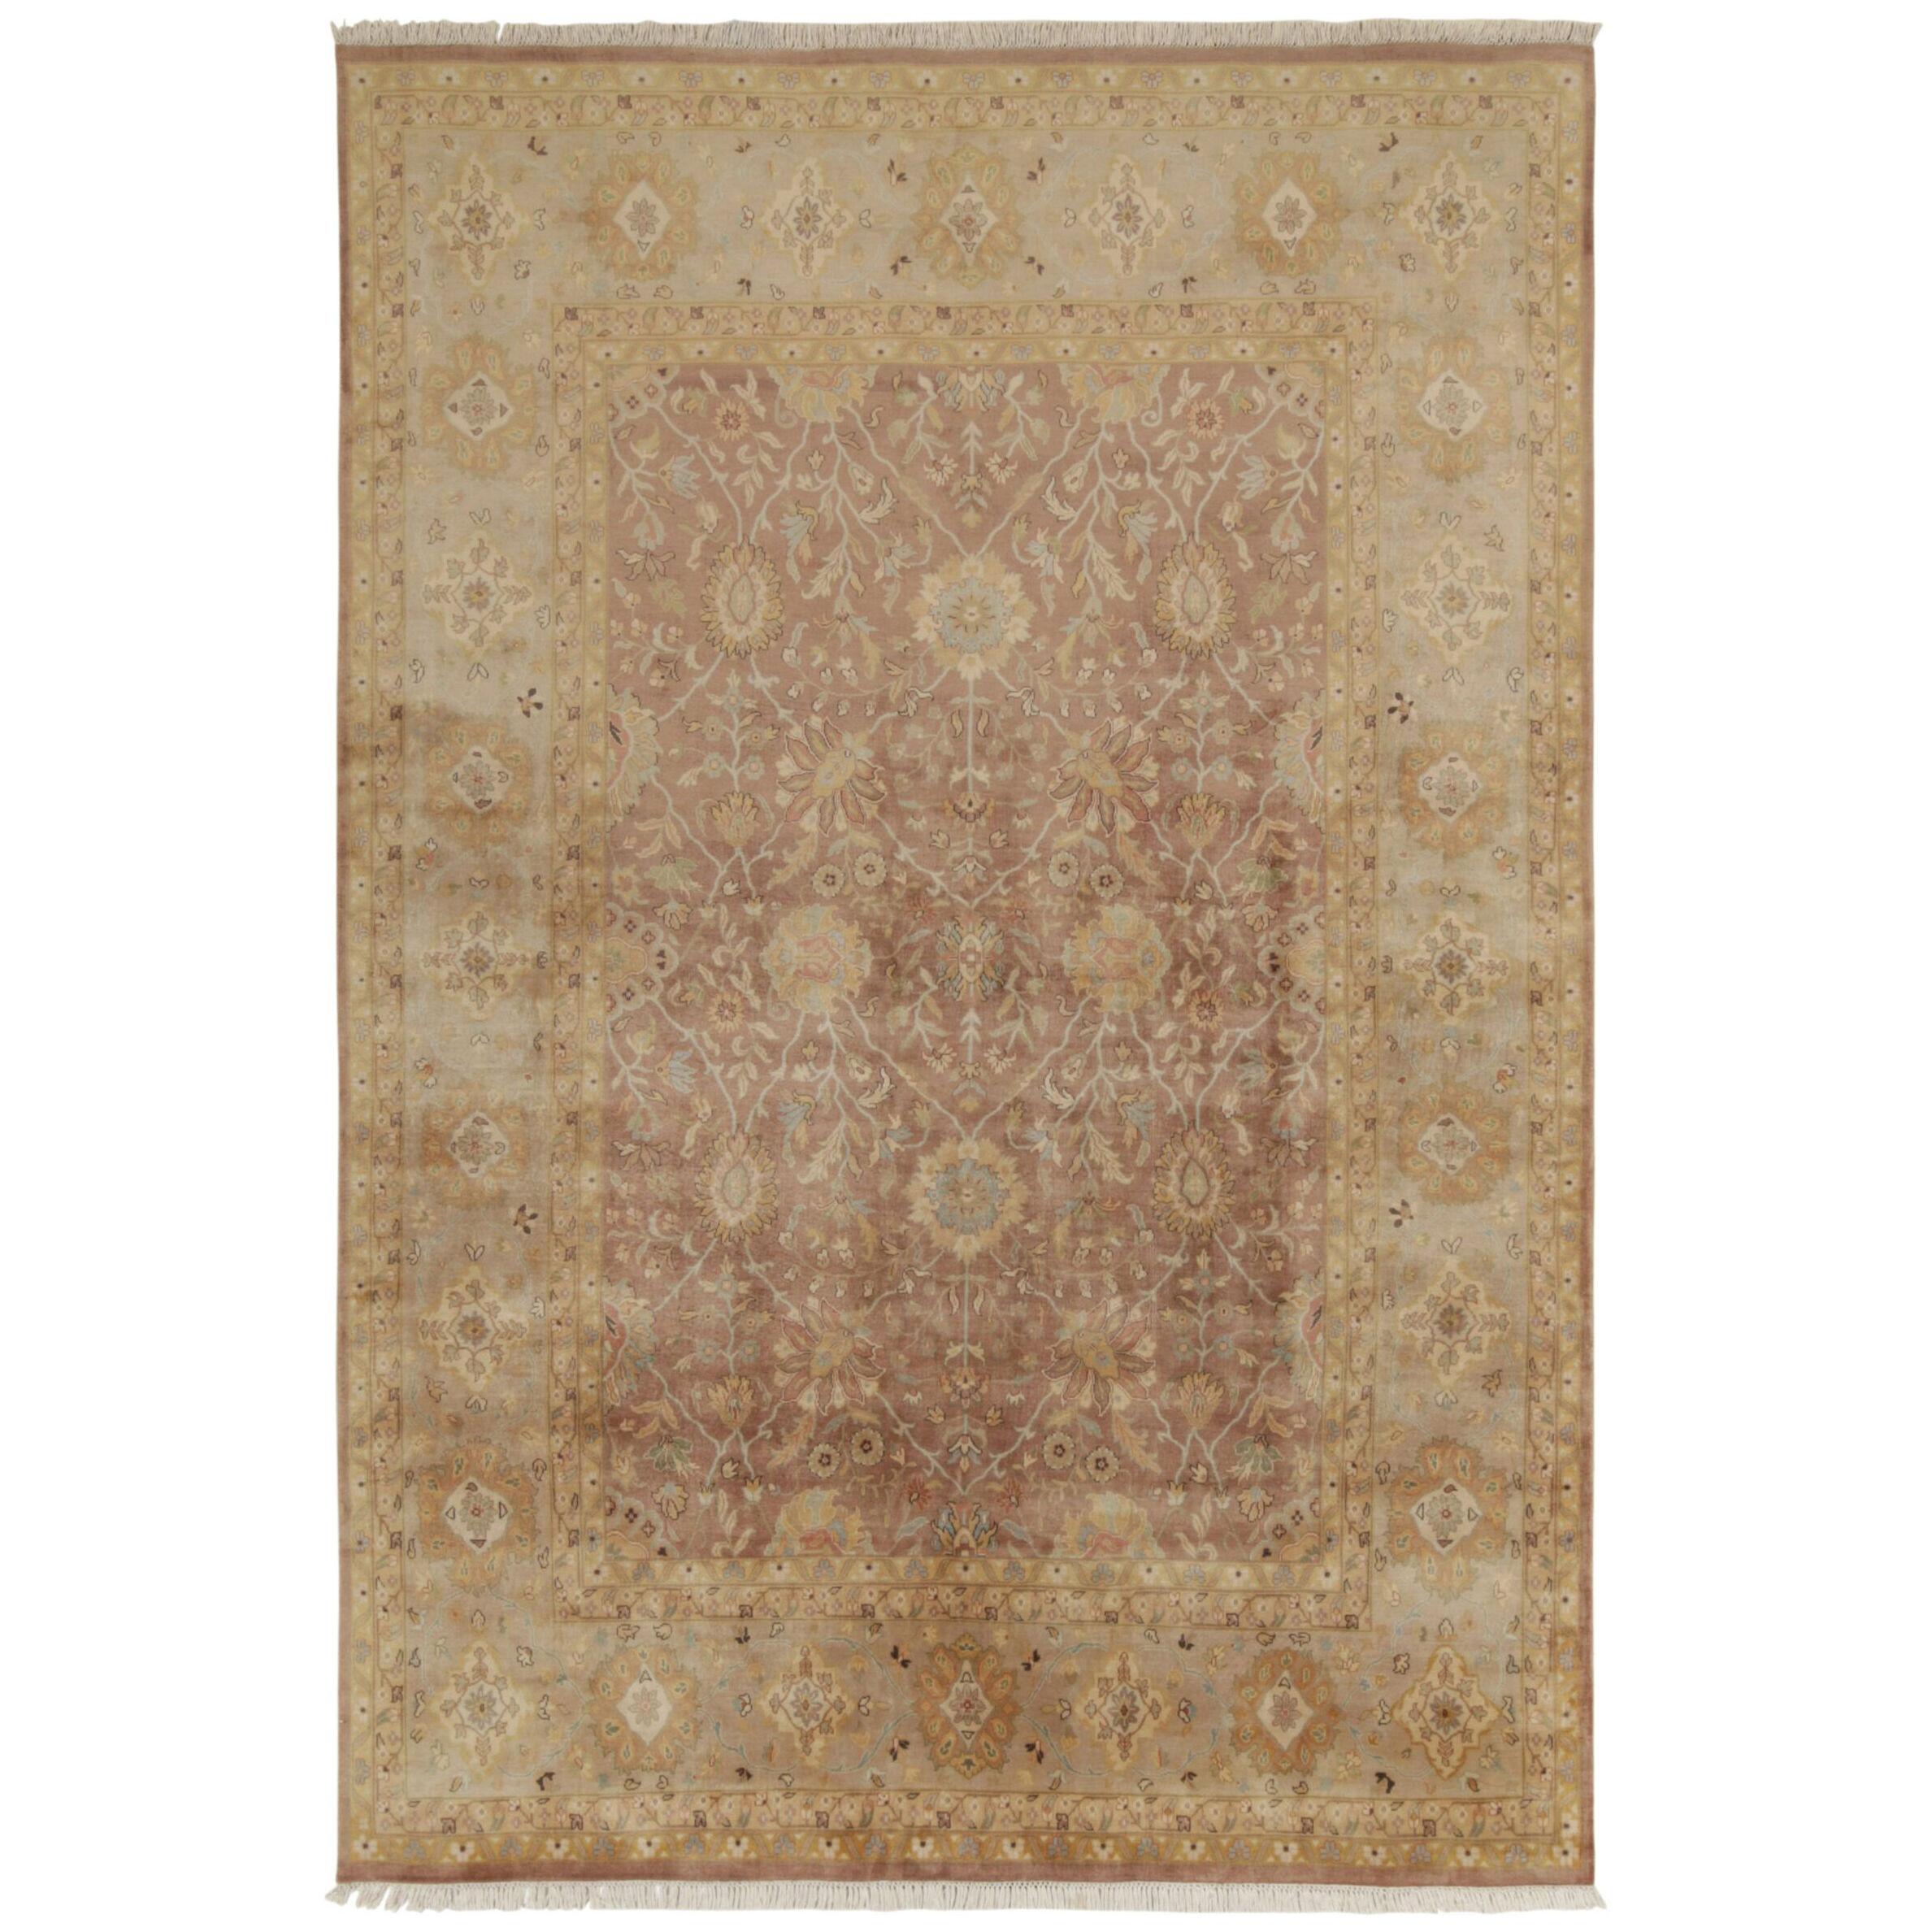 Rug & Kilim’s Tabriz Style Rug in Brown With Gold & Blue Floral Patterns